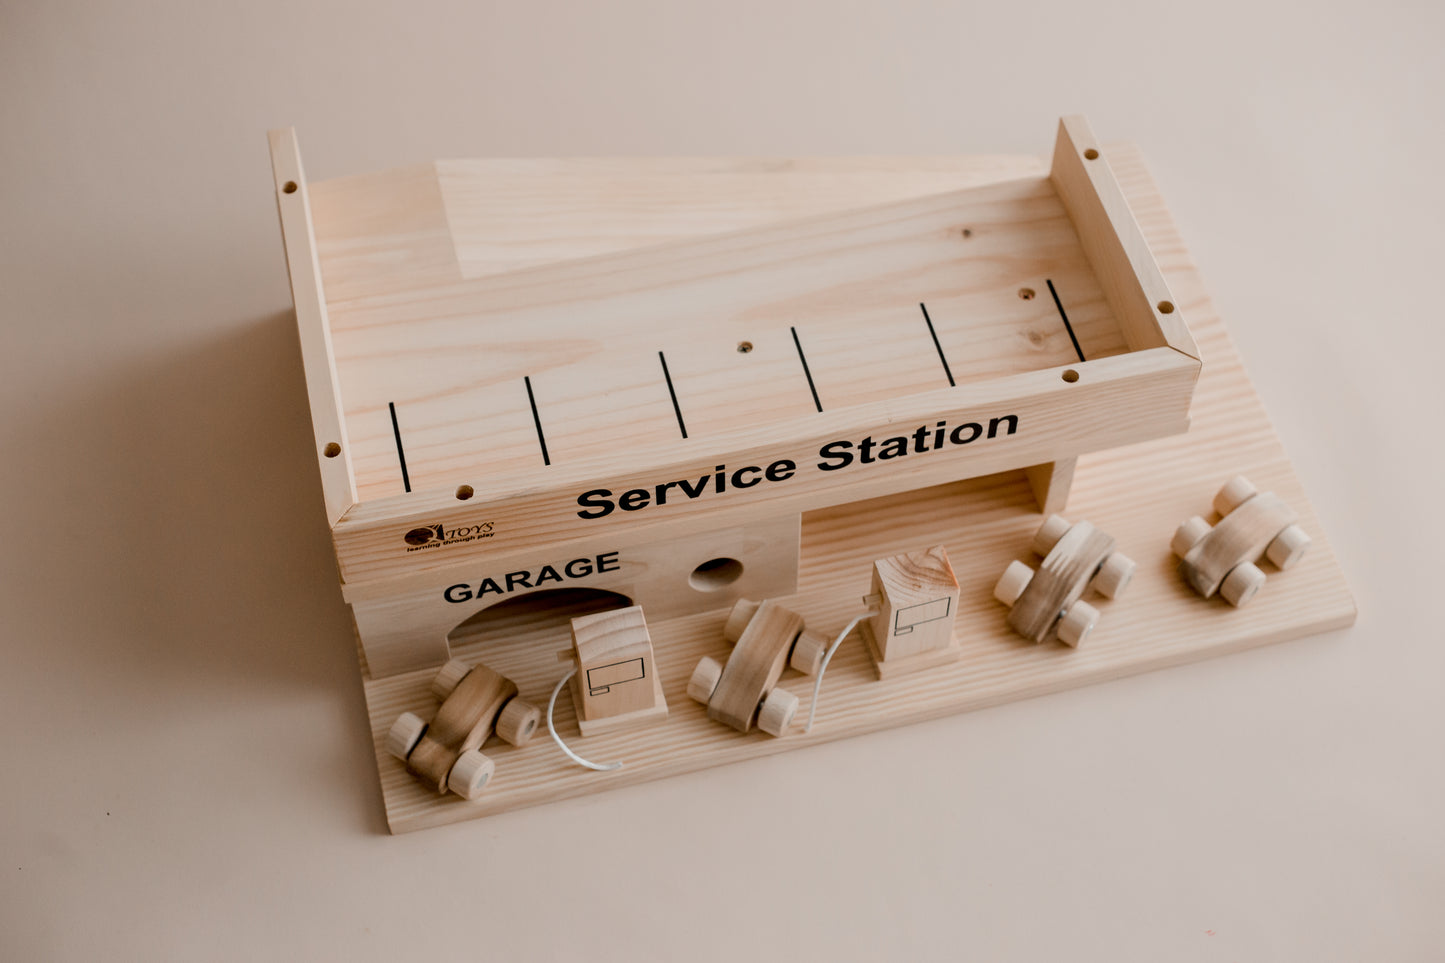 Wooden Service Station